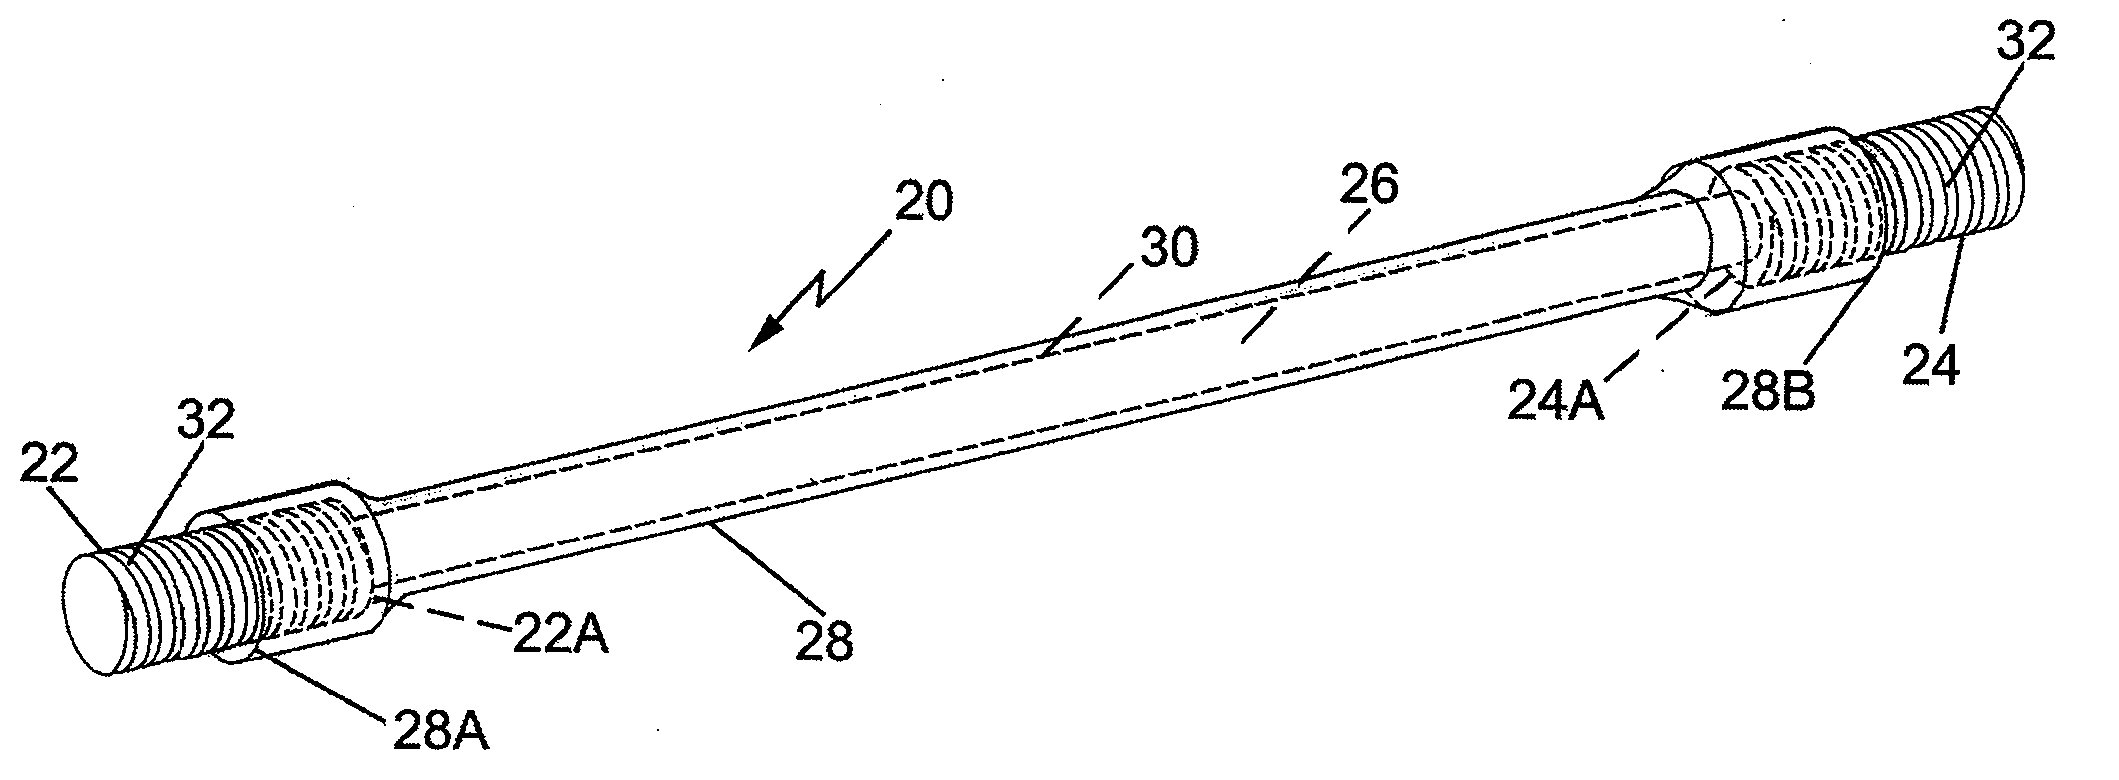 Fiducial marker with absorbable connecting sleeve and absorbable spacer for imaging localization